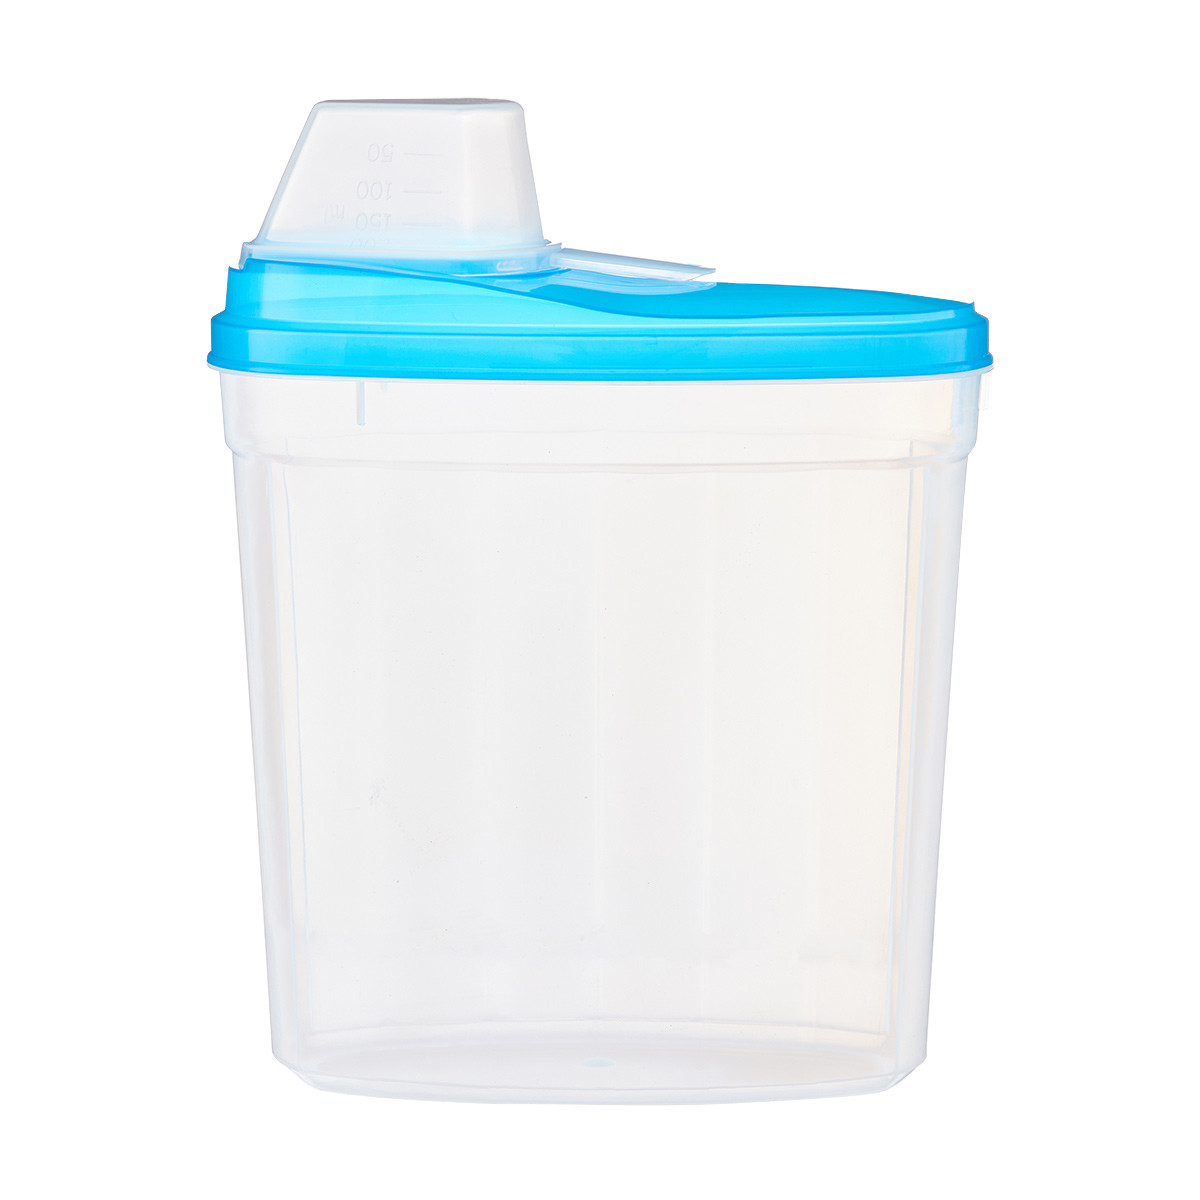 Stor-all Solutions Large Food Keeper Containers with Pop-up Lid